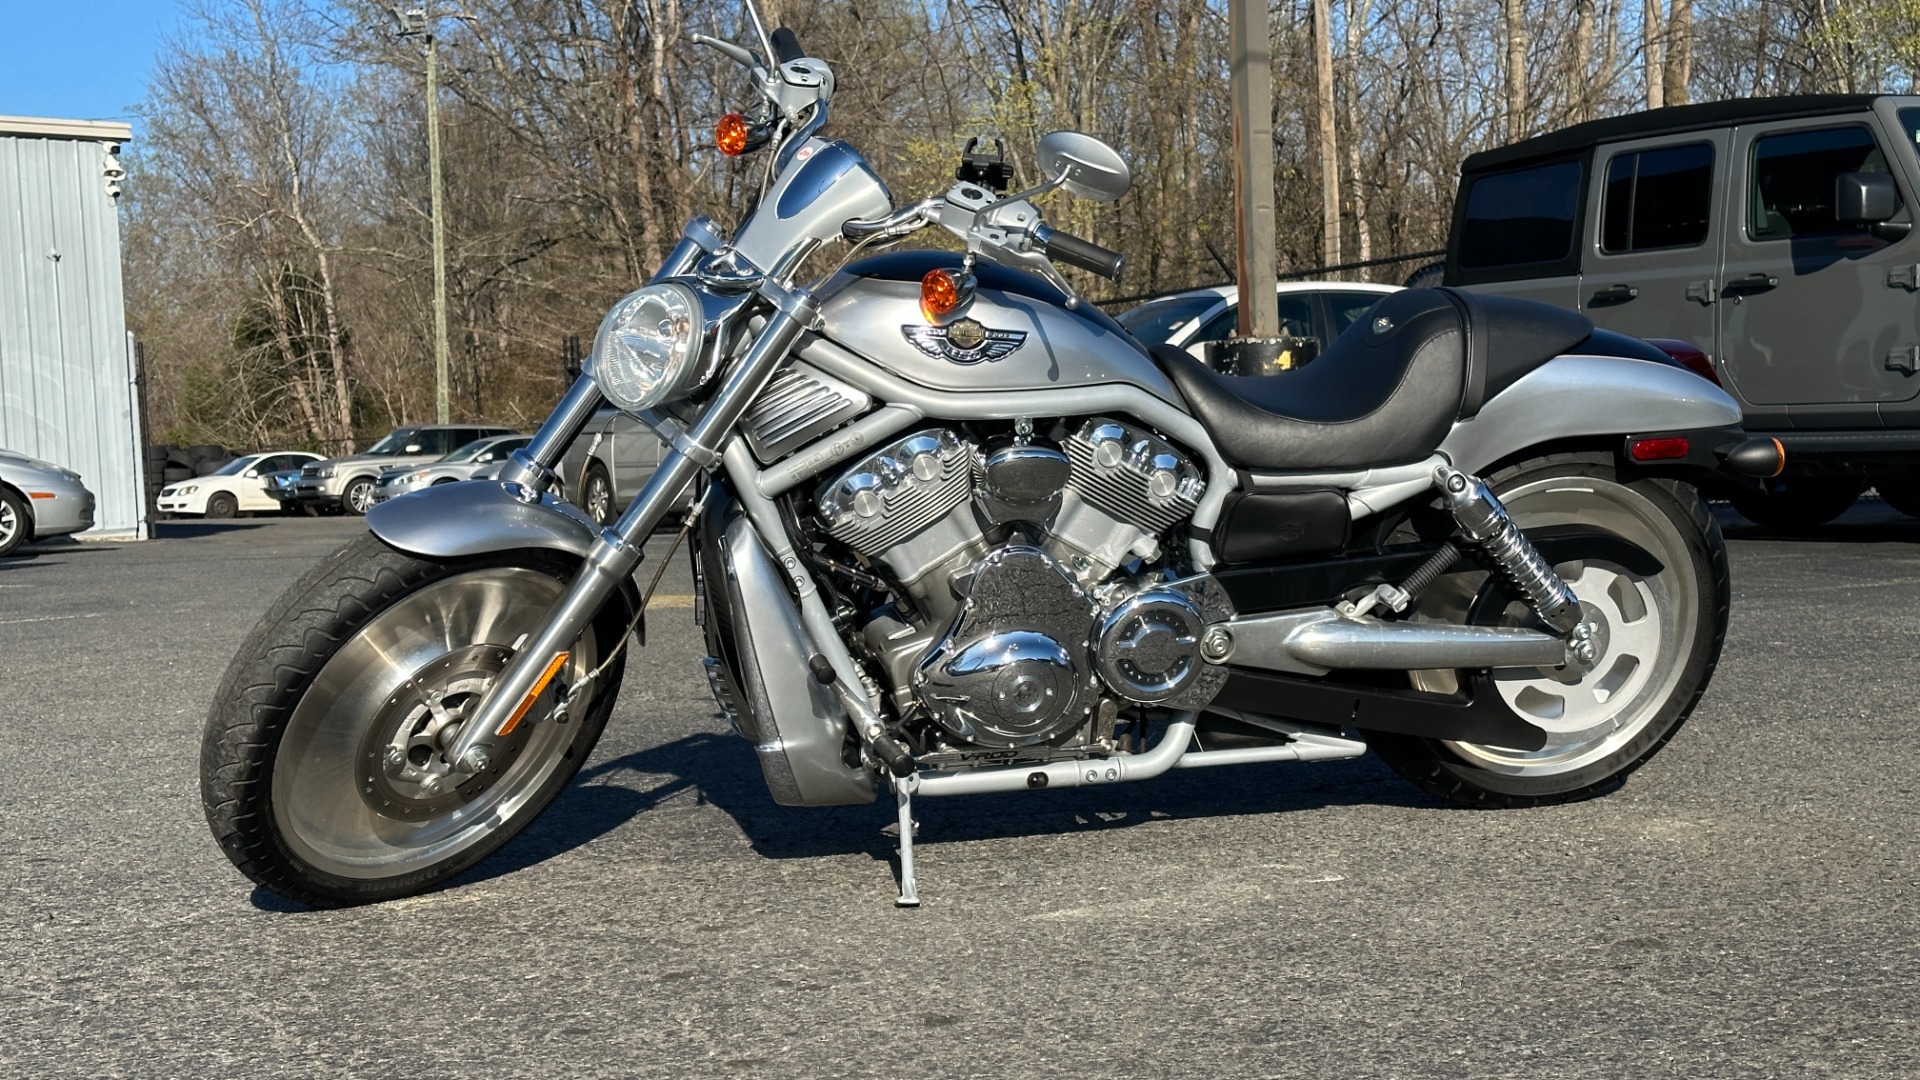 Used 2003 Harley Davidson V Rod ANNIVERSARY EDITION / 1130CC ENGINE / BREMBO BRAKES / VORTEX AIR SCOOPS for sale $7,695 at Formula Imports in Charlotte NC 28227 56